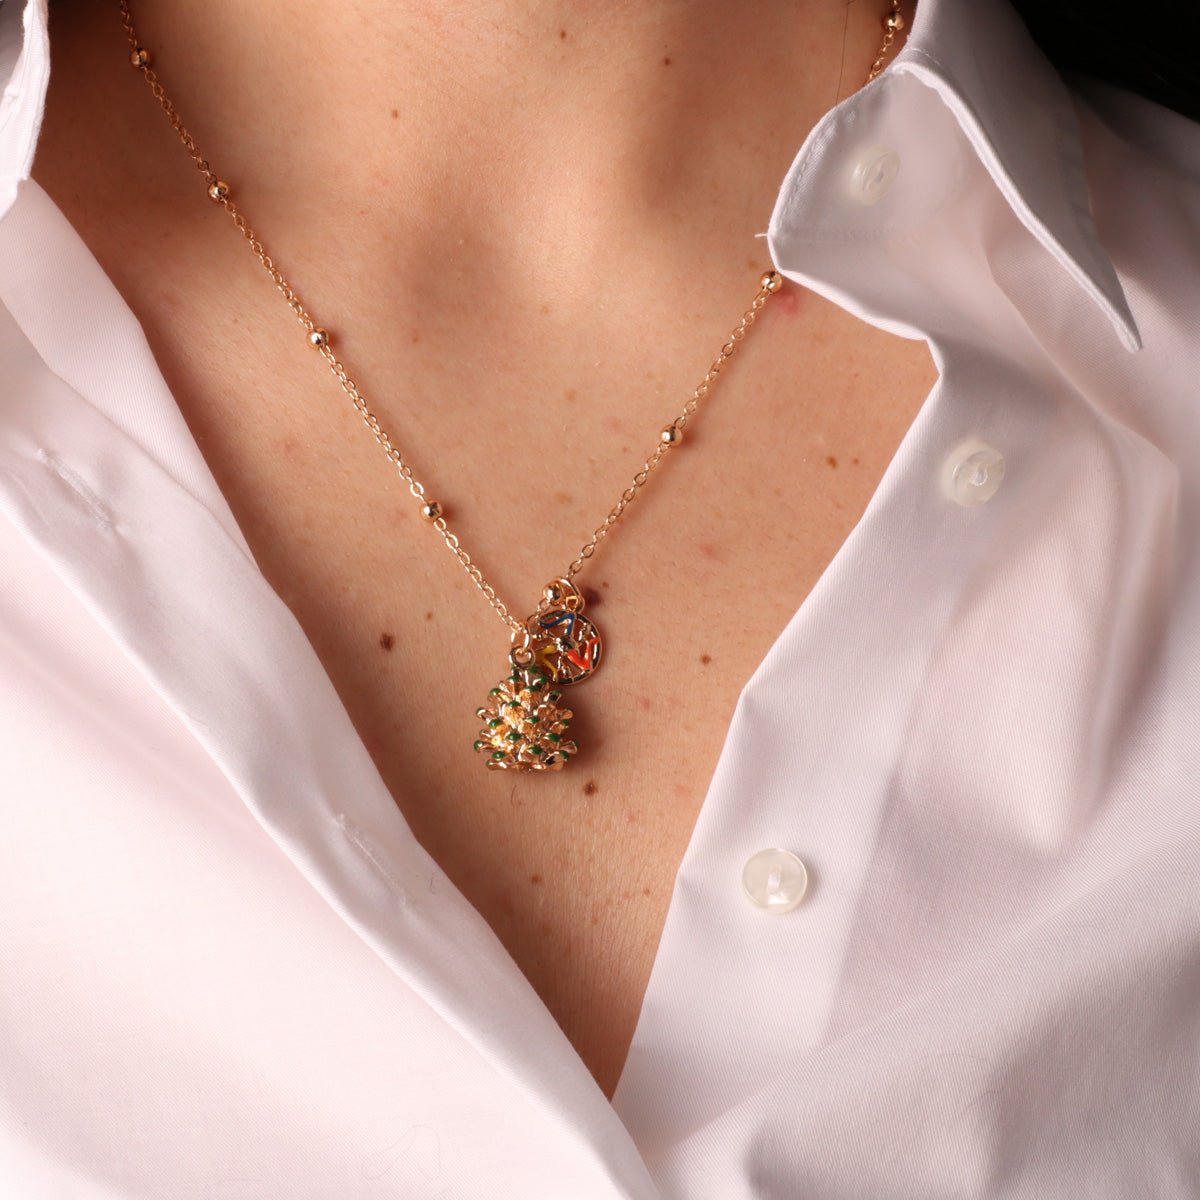 Metal necklace with pallini shirt with charming and trinacria pendant